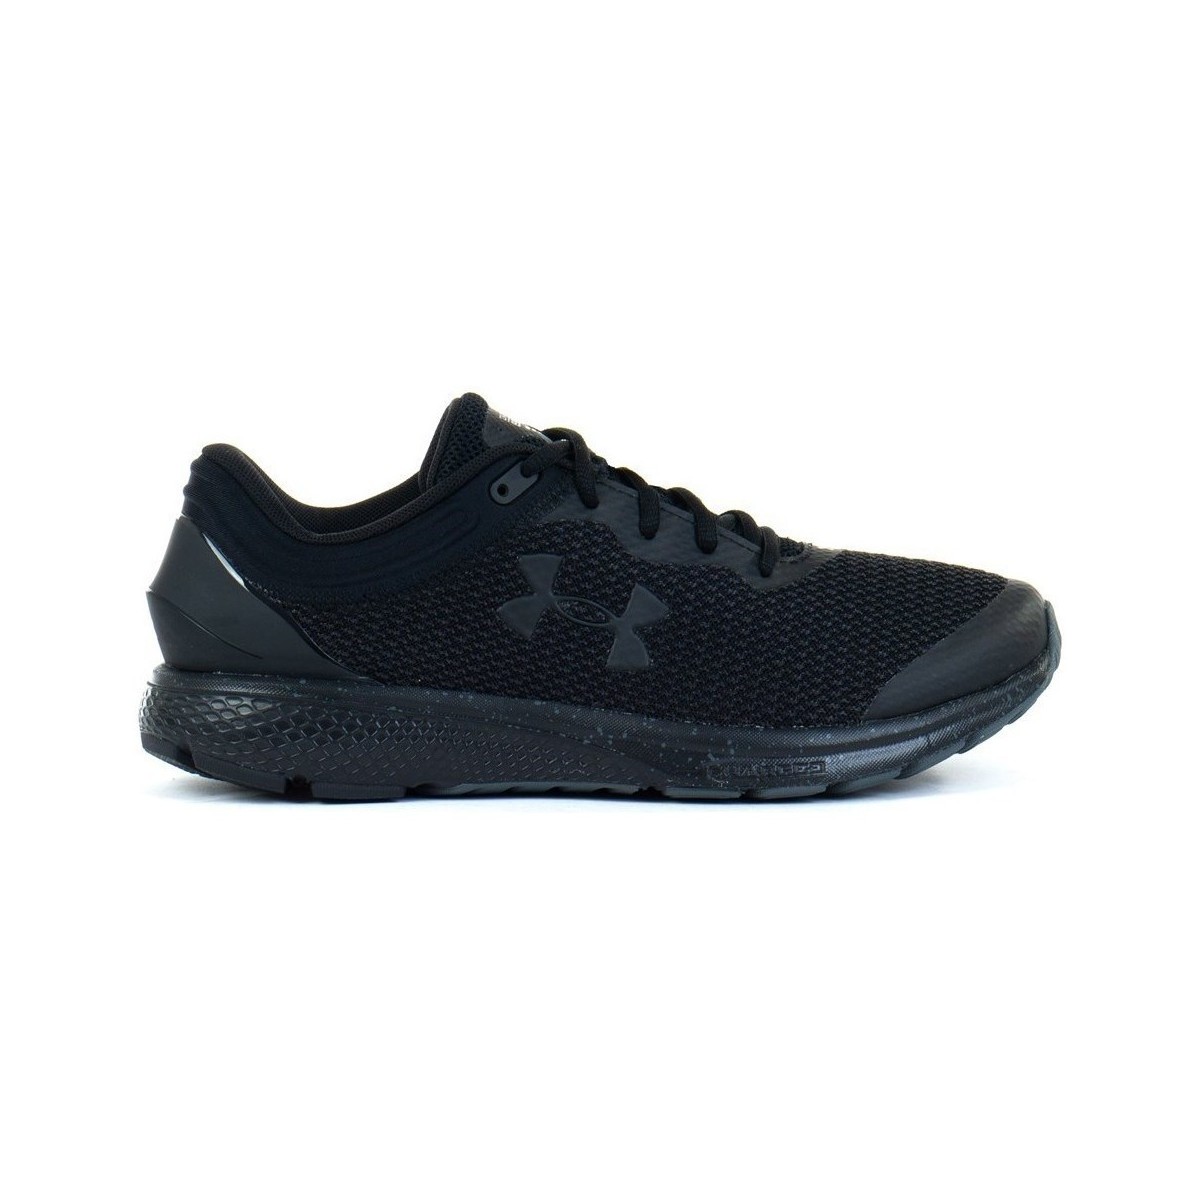 Sko Herre Lave sneakers Under Armour Charged Escape 3 Sort